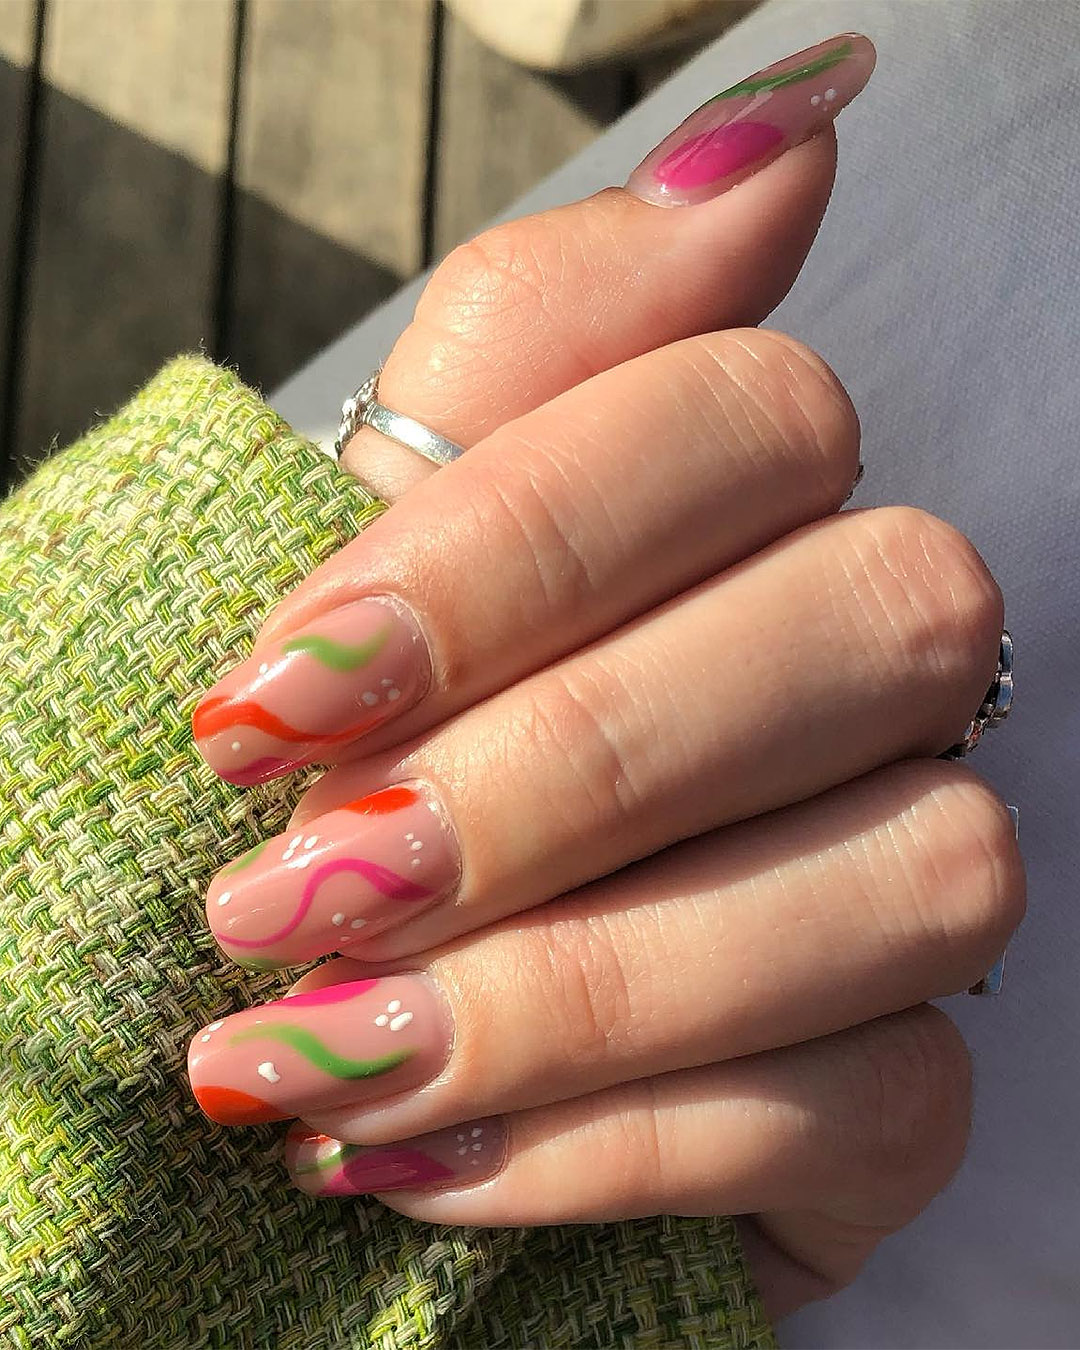 Brightly coloured nails by The Nail Studio.